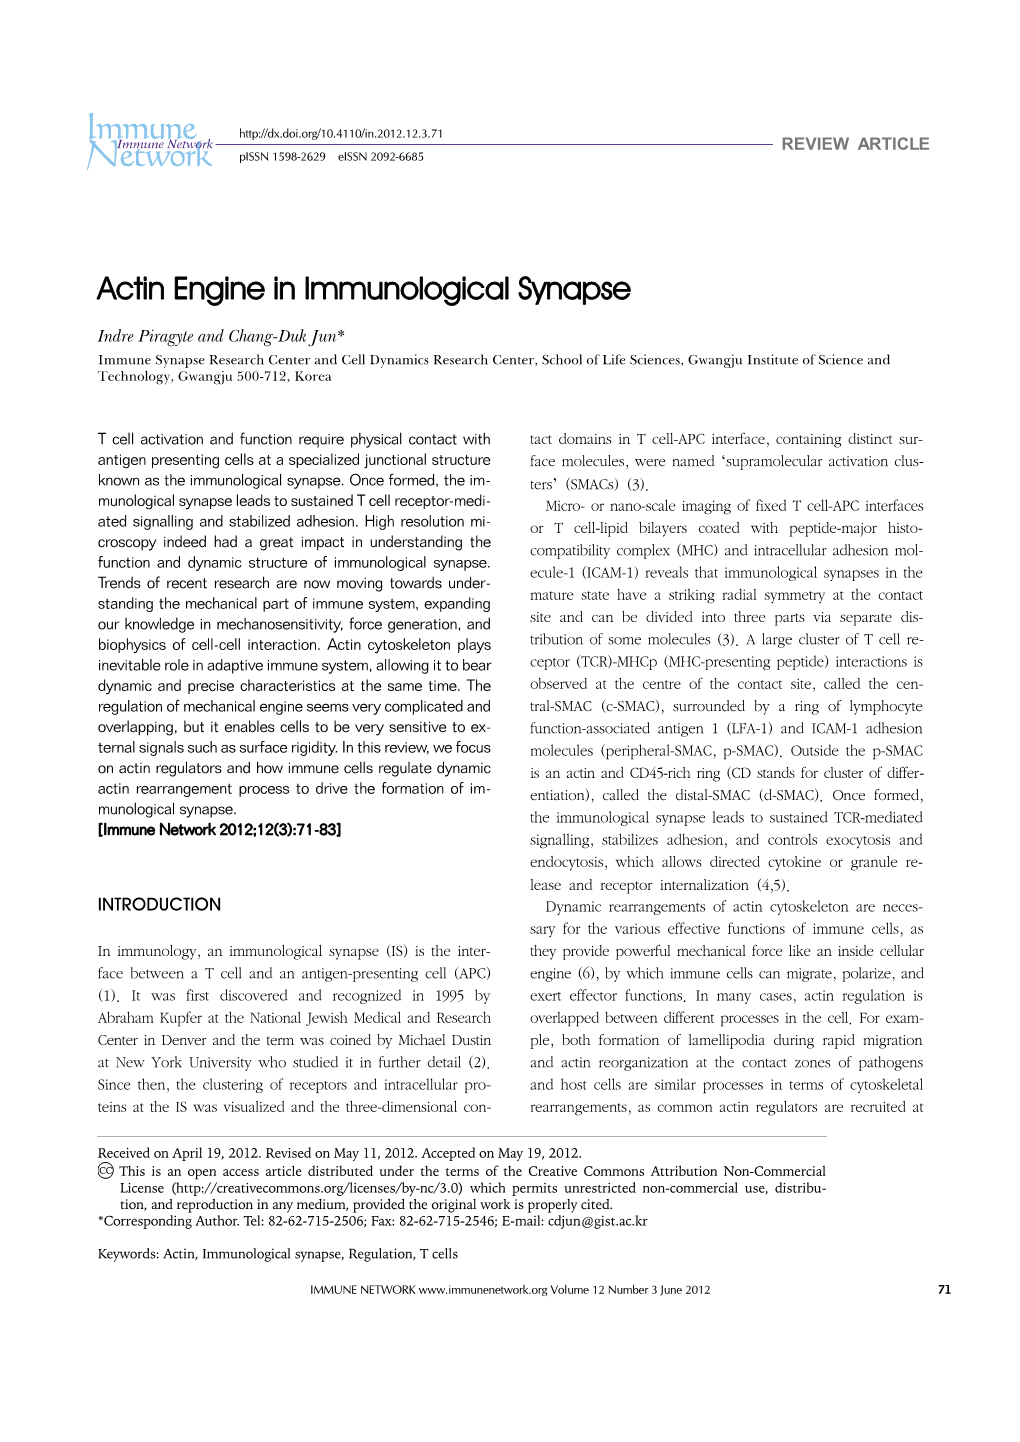 Actin Engine in Immunological Synapse